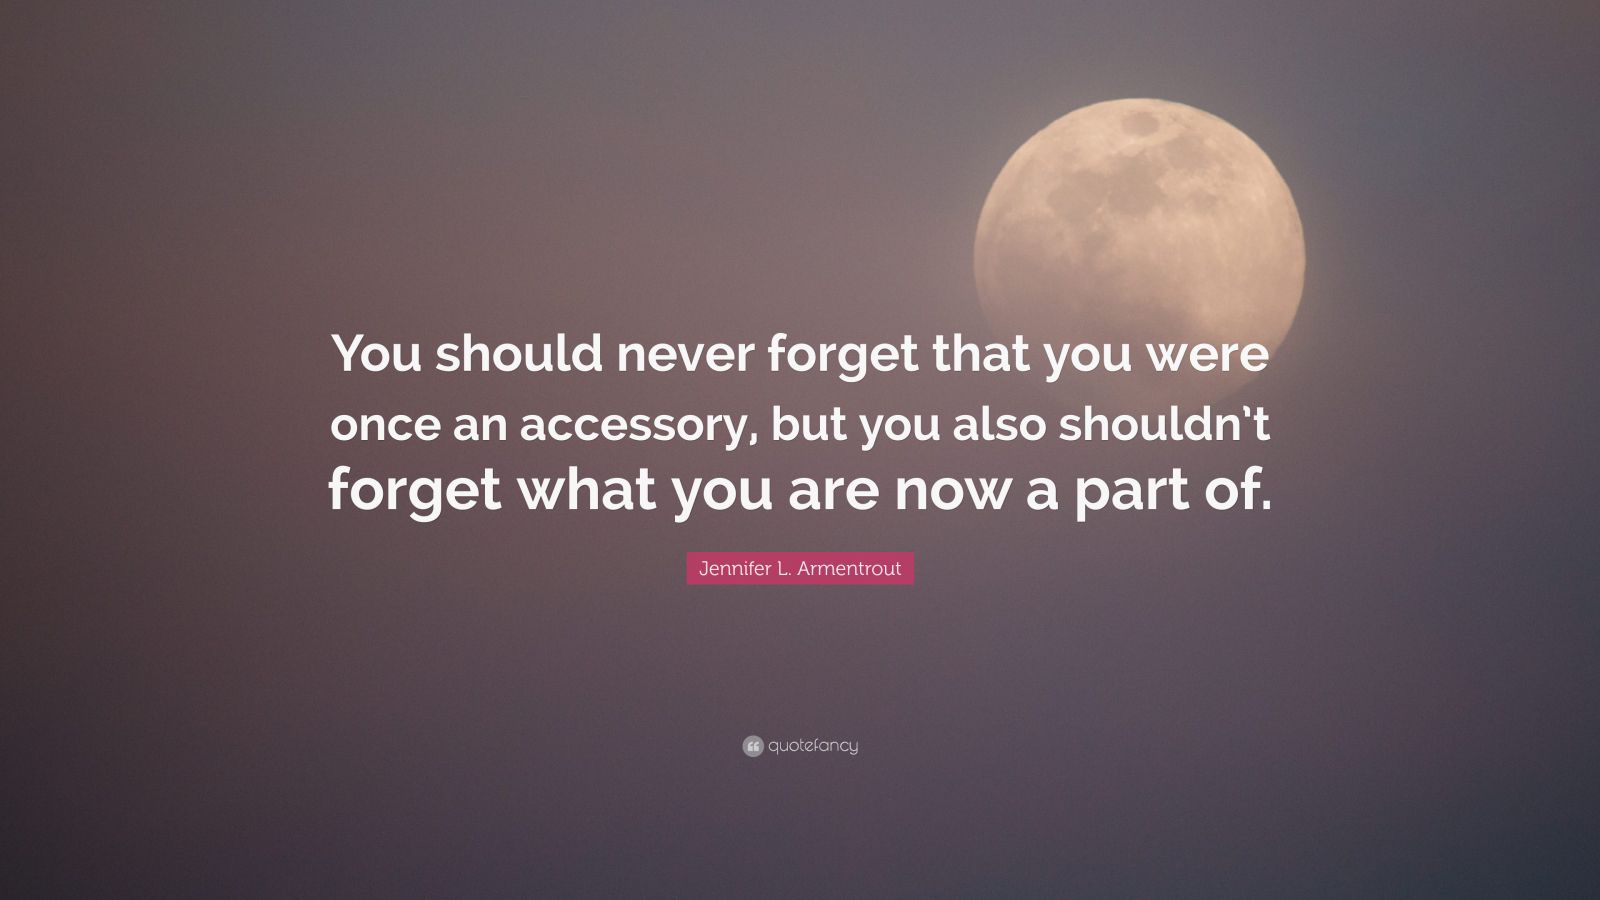 Jennifer L. Armentrout Quote: “You should never forget that you were ...